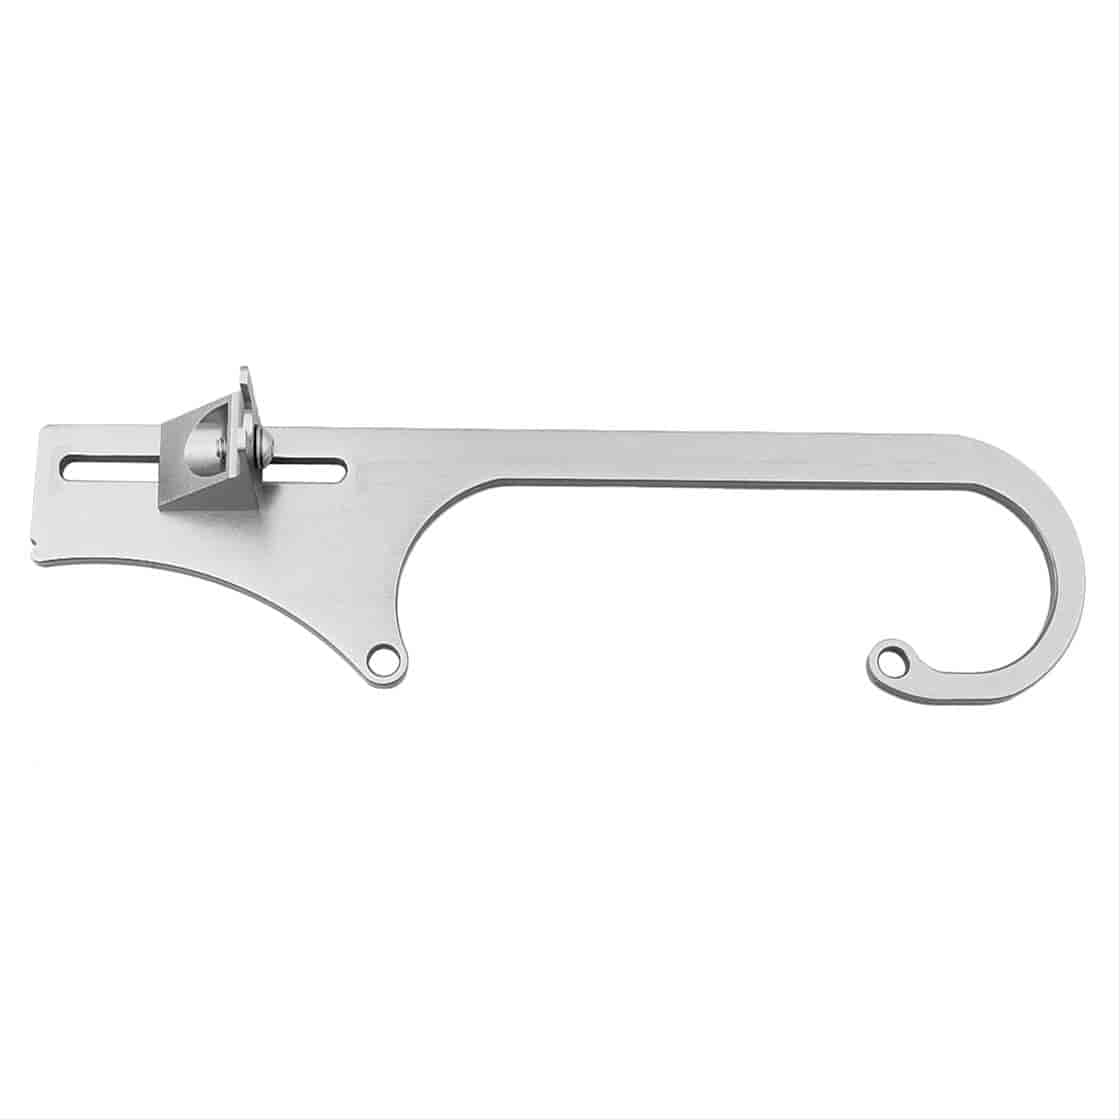 Adjustable Throttle Cable Bracket - Clear Fits 4150